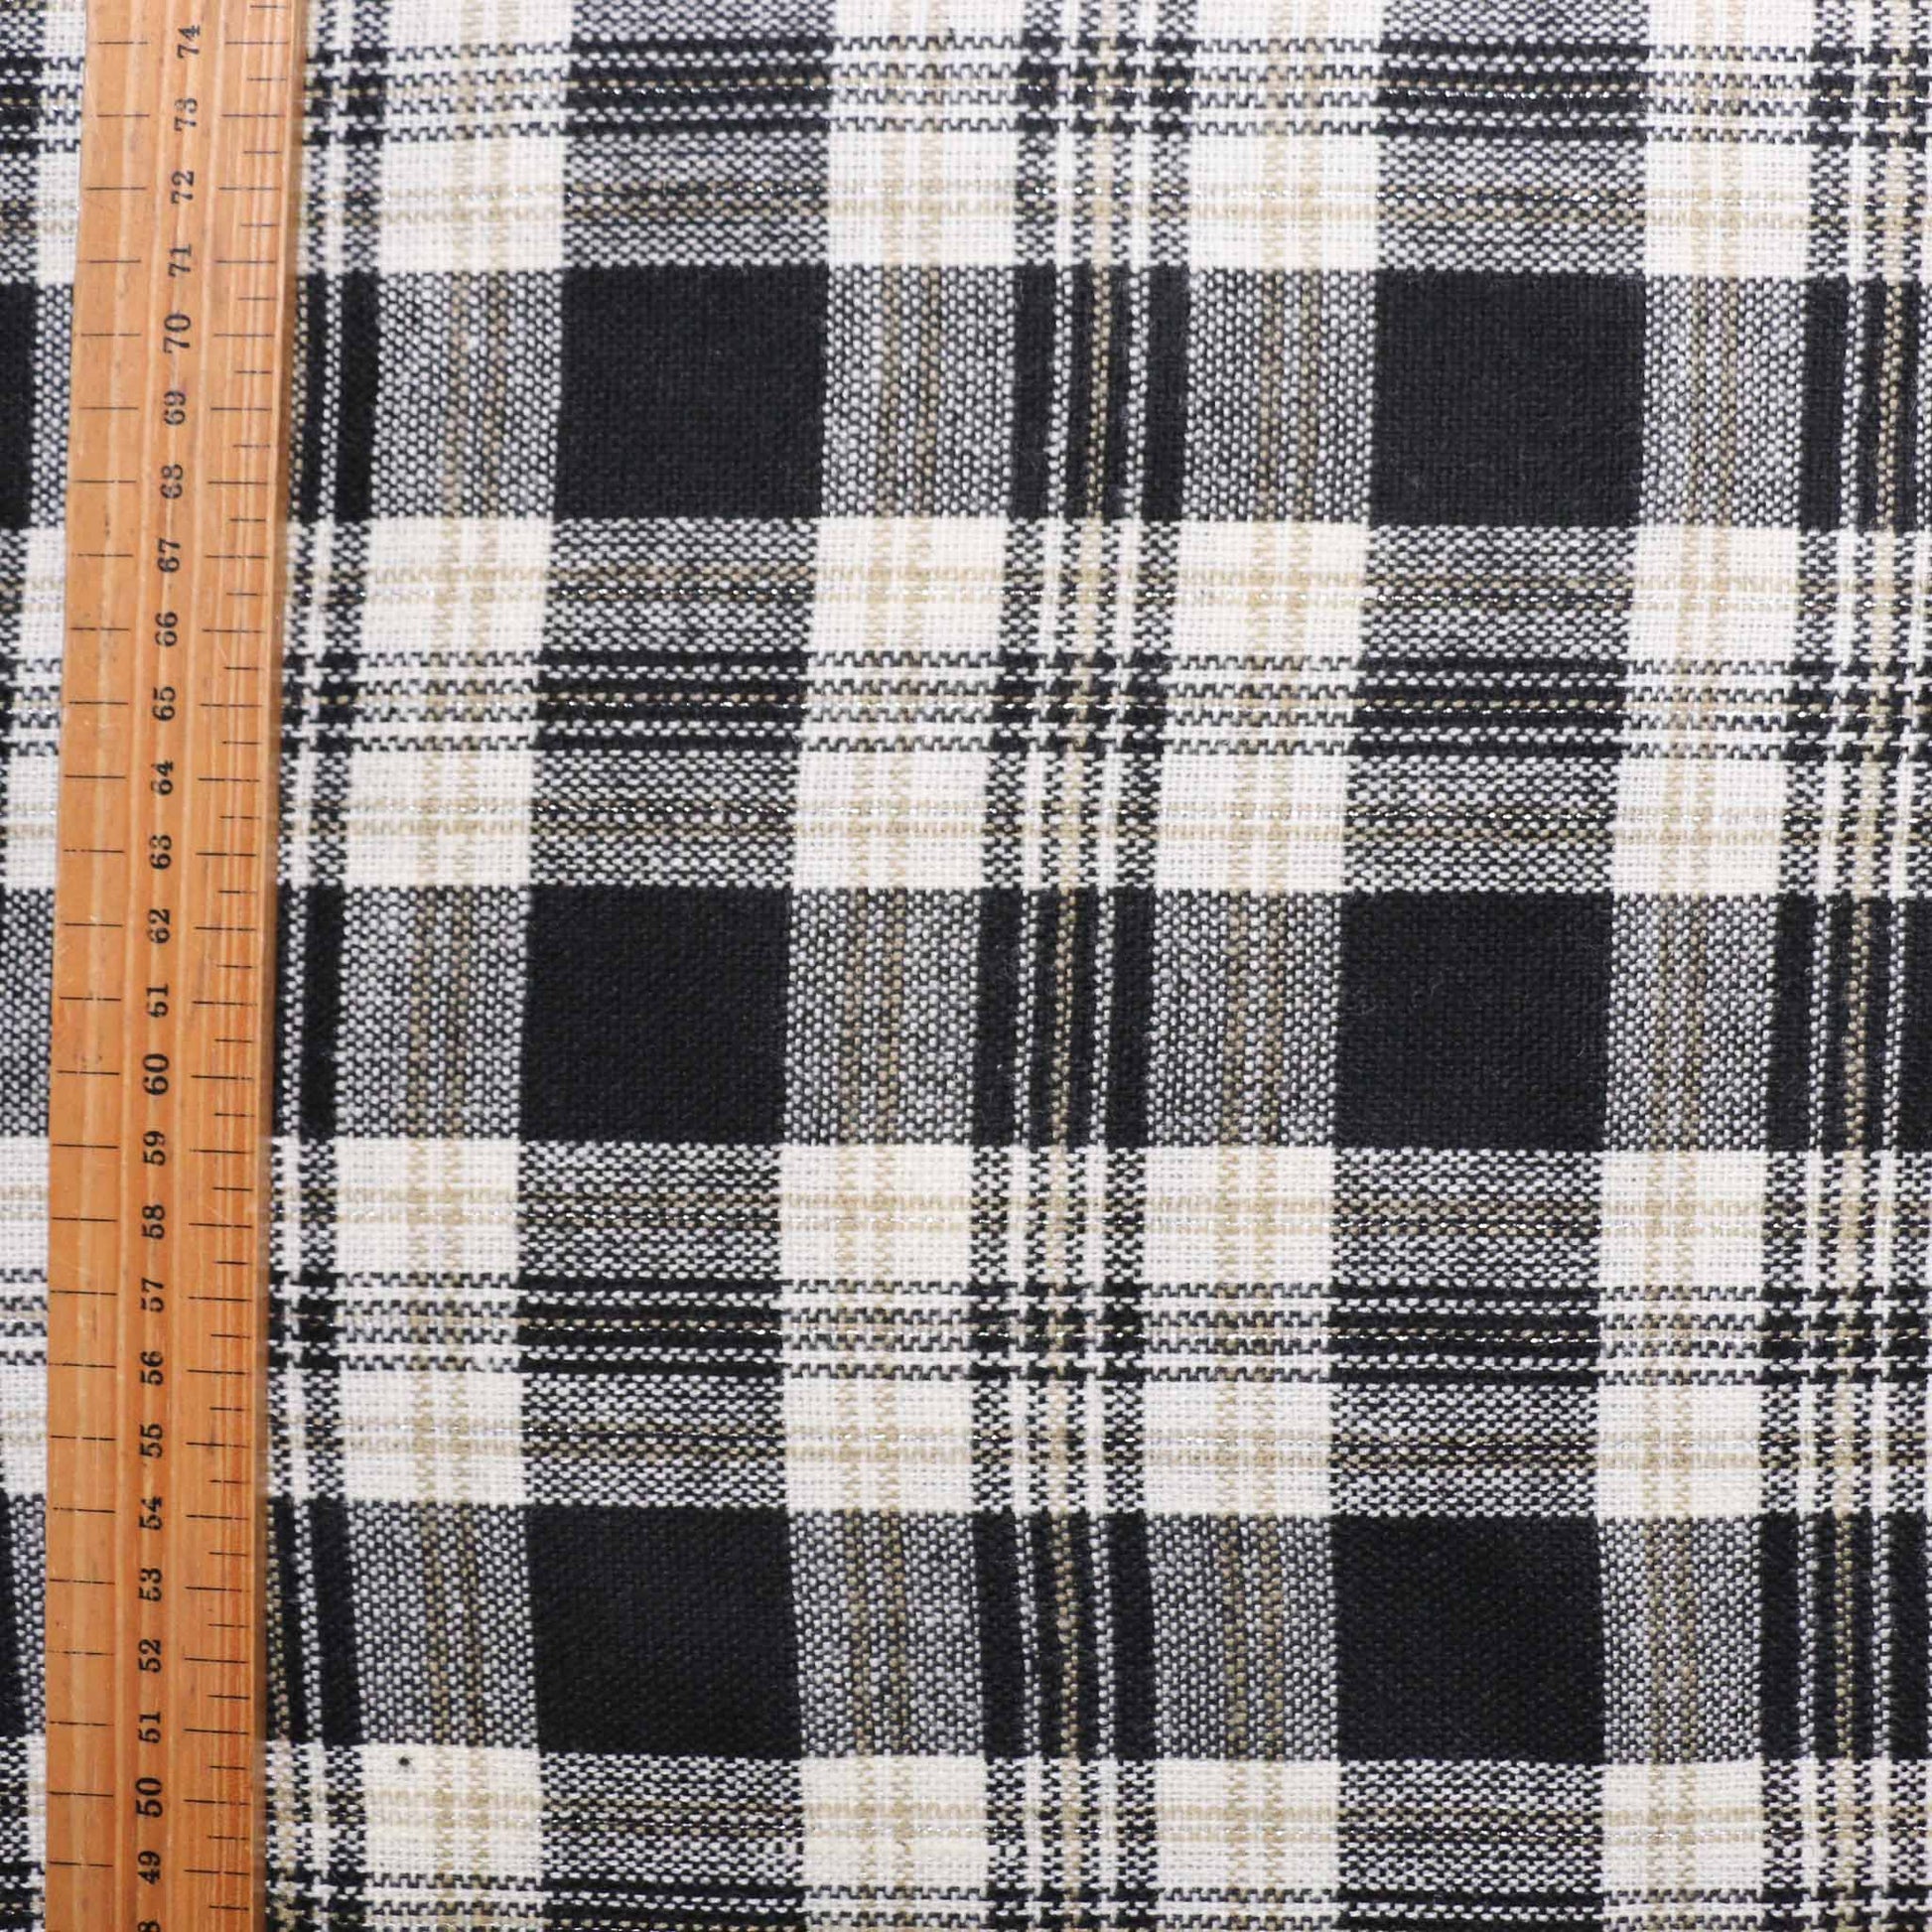 metre wool blend suiting dressmaking fabric with black and khaki check pattern on white